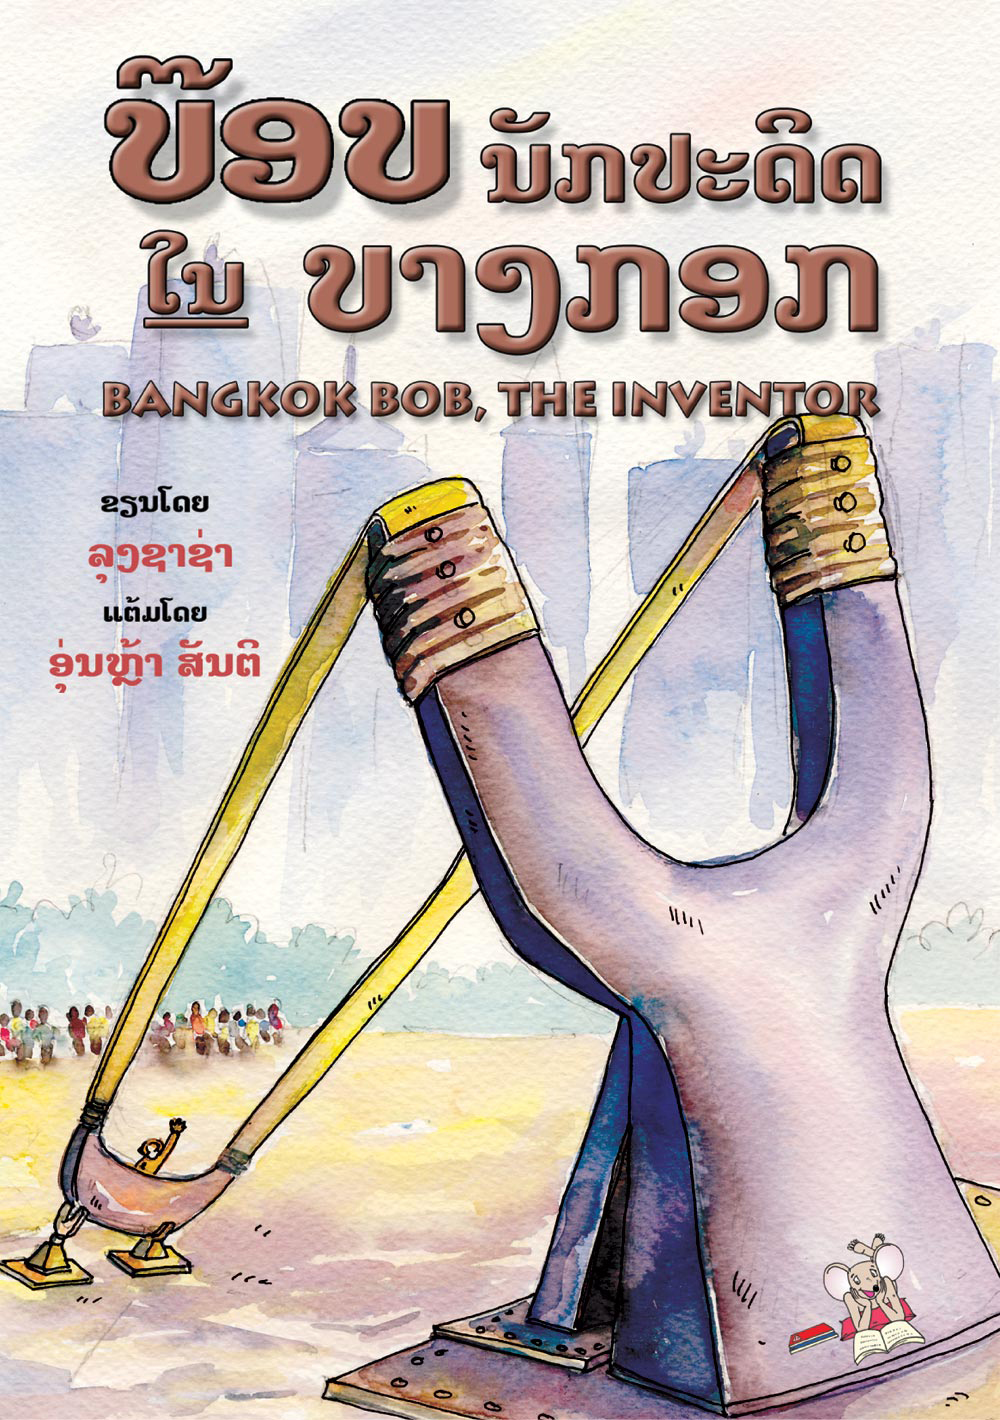 Bangkok Bob, the Inventor large book cover, published in Lao language